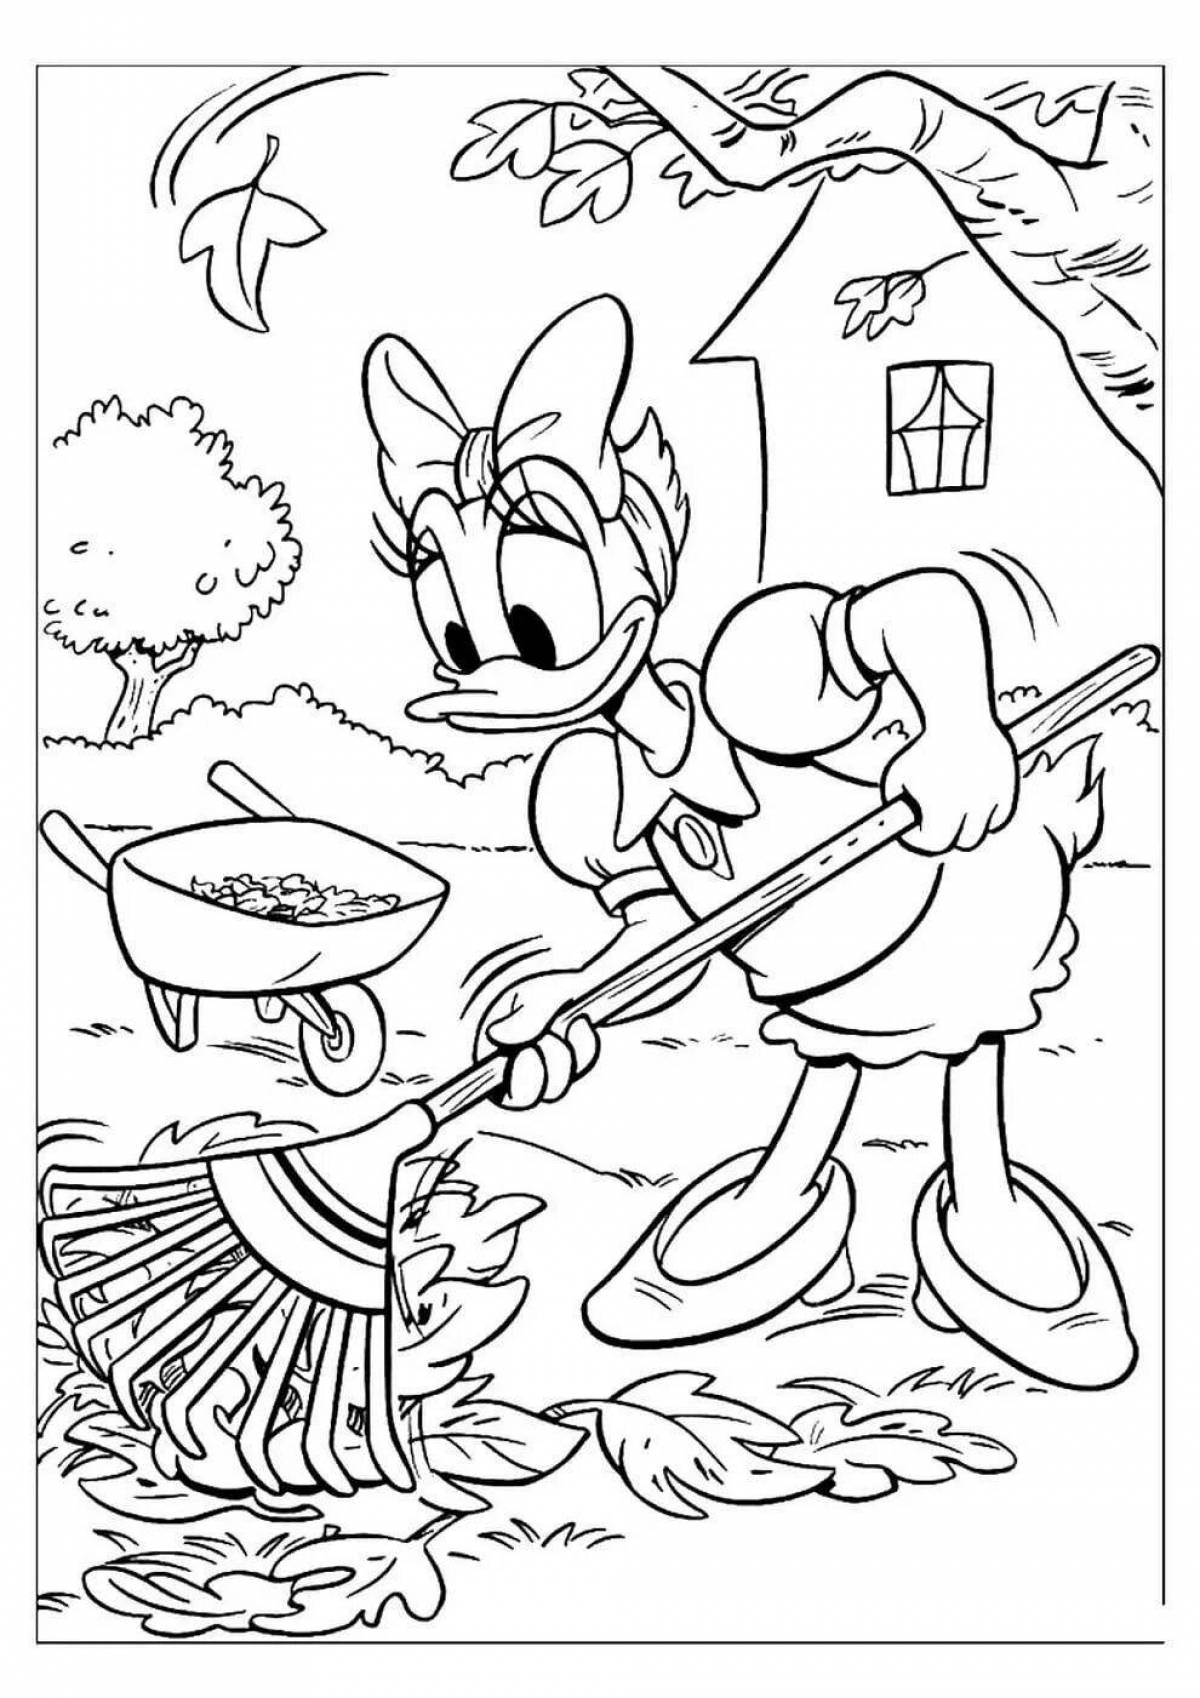 Ooty's dazzling coloring book